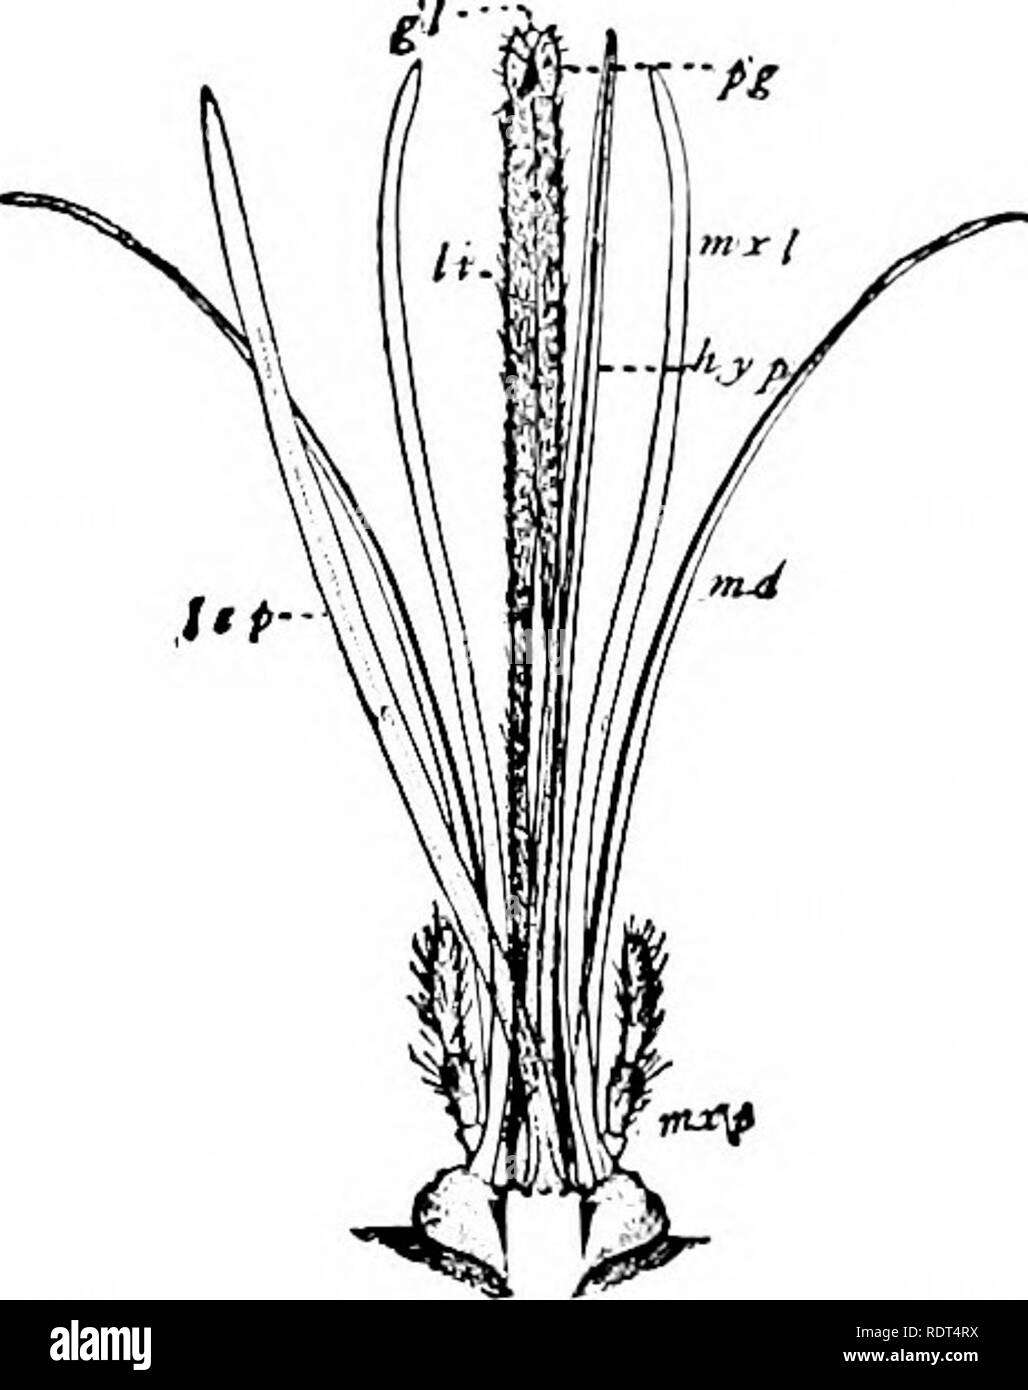 . First lessons in zoology. Zoology. 50. Fig. 51. Yir,. 50. — llcail and mouth parts of honey-bee; note the sliort trowel-like niandililes tor niouhlinL,' wax when building comb, and the extended [irolioscis for sucking flower nectar. (Much enlarged; from specimen.) I'lc. 51.—Piercing and sucking beiik of the mosquito (female) dissected to sIhjw its parts. (Much enlarged; from specimen.) food. Among mammals the same large e.xtent of variety in the mouth structure exists as among insects and birds. Compare the teeth and other mouth parts of a rat, beaver, cat, pig, horse, sheep, and man, noting Stock Photo